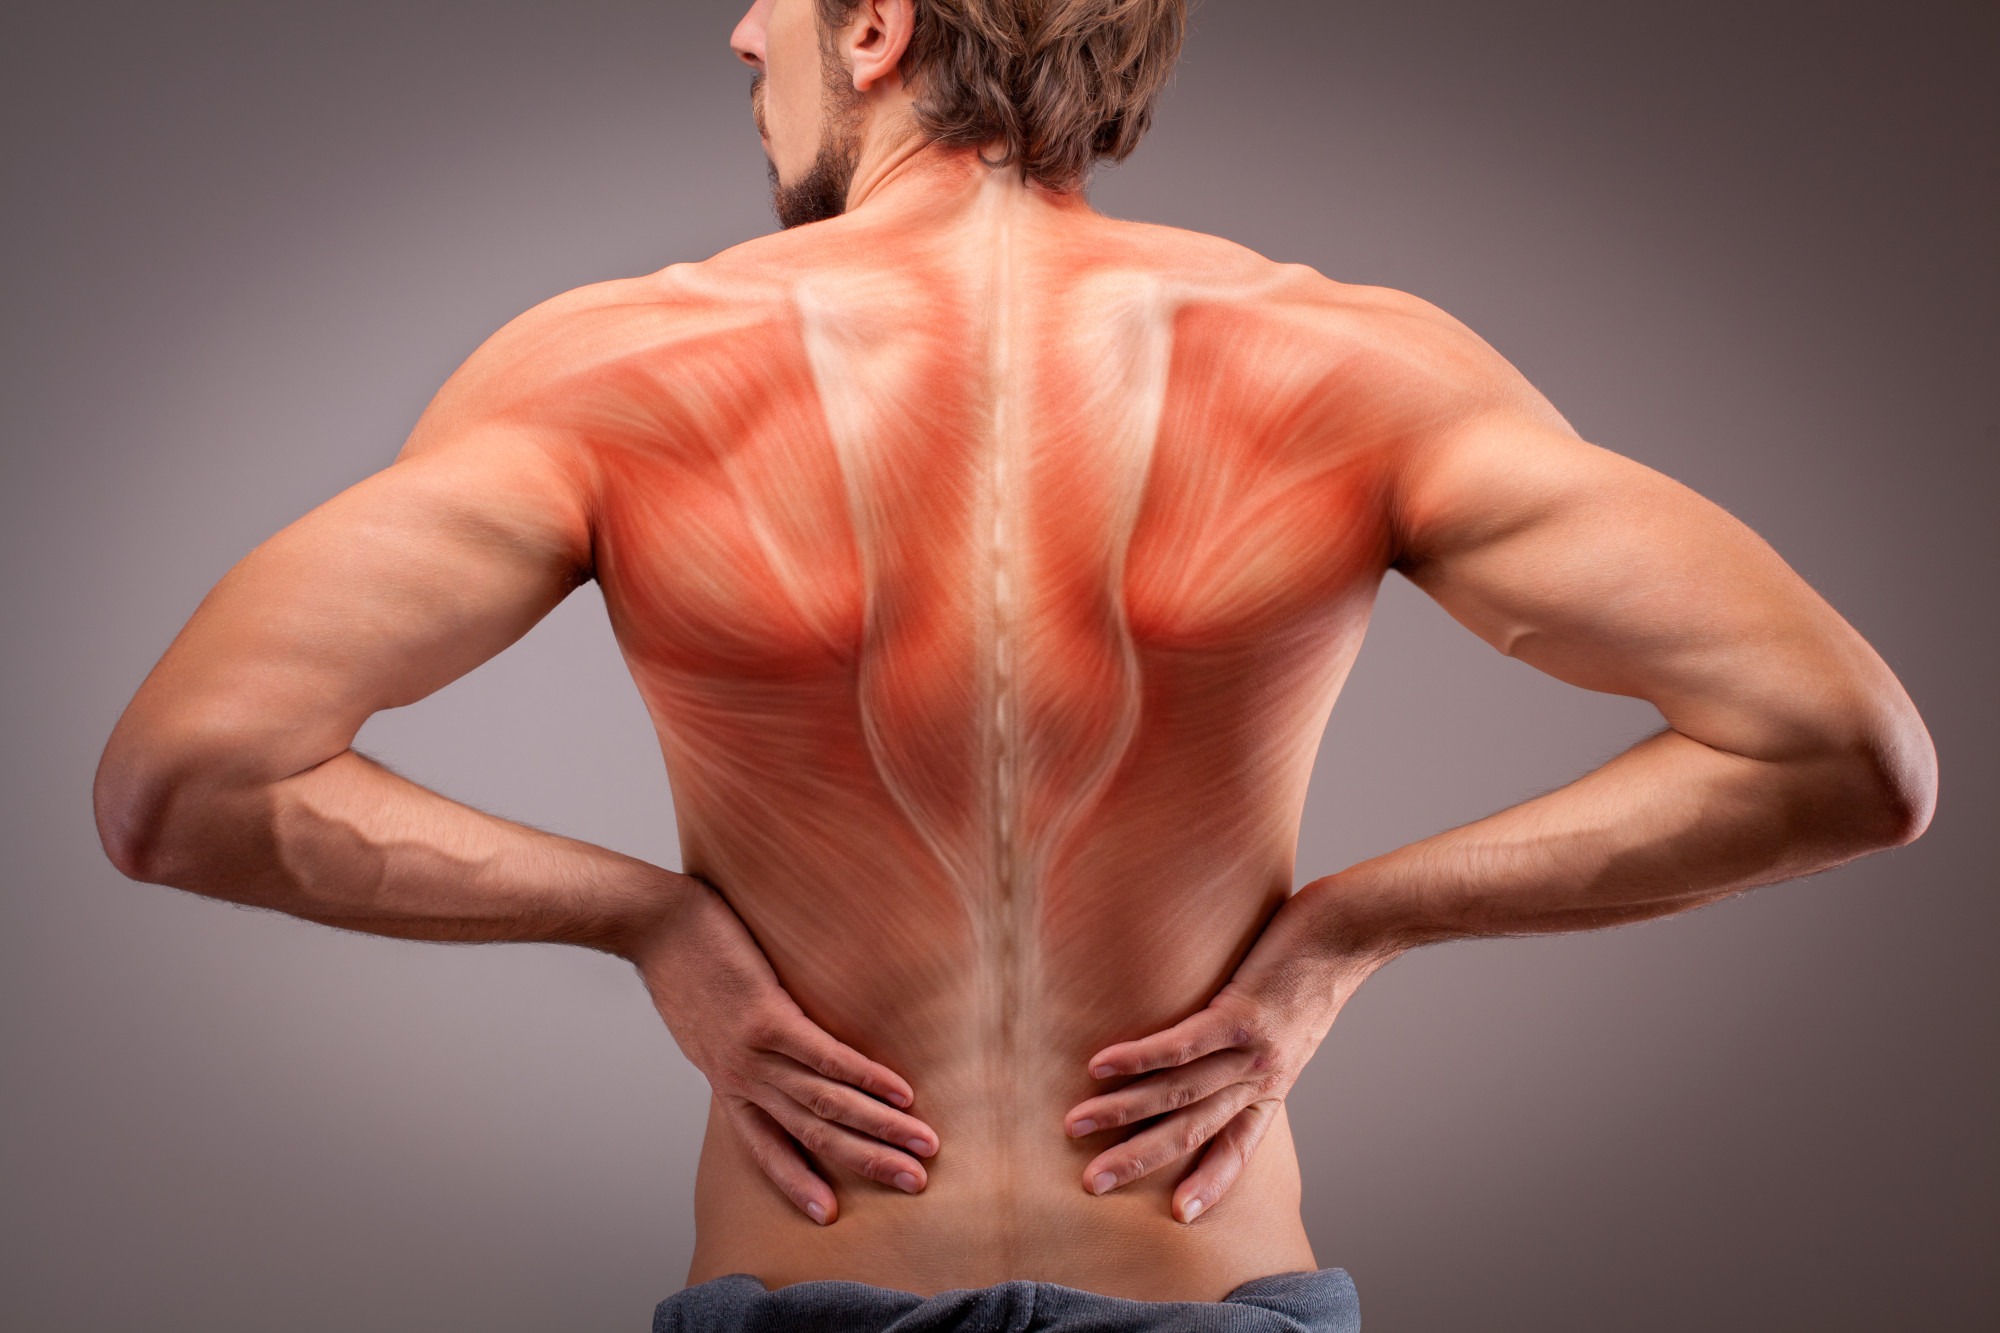 Put Your Back In to It!: How to Strengthen Your